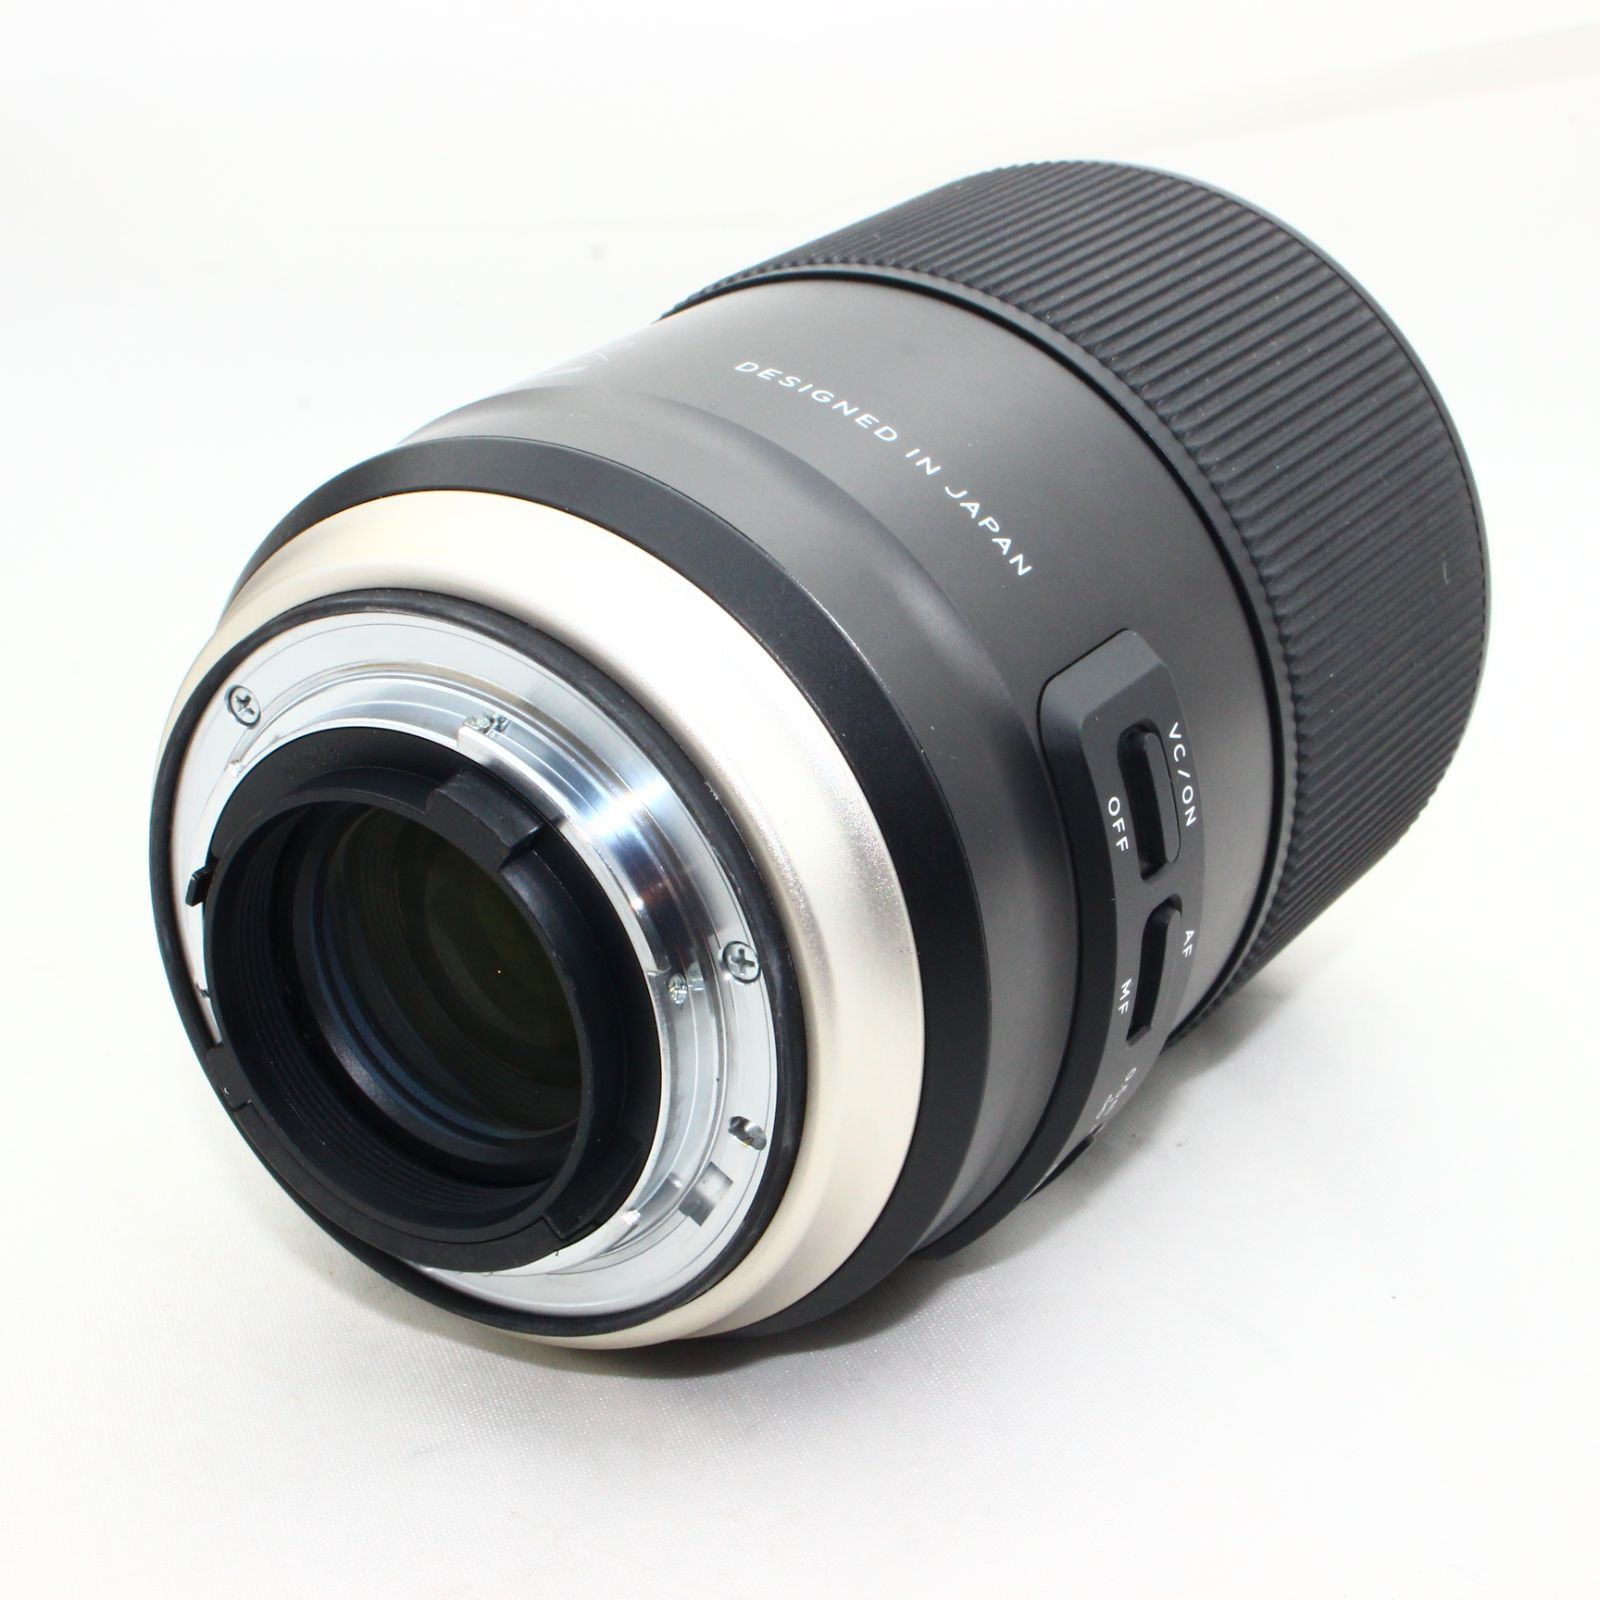 TAMRON 単焦点マクロレンズ SP90mm F2.8 Di MACRO 1:1 VC USD ニコン用